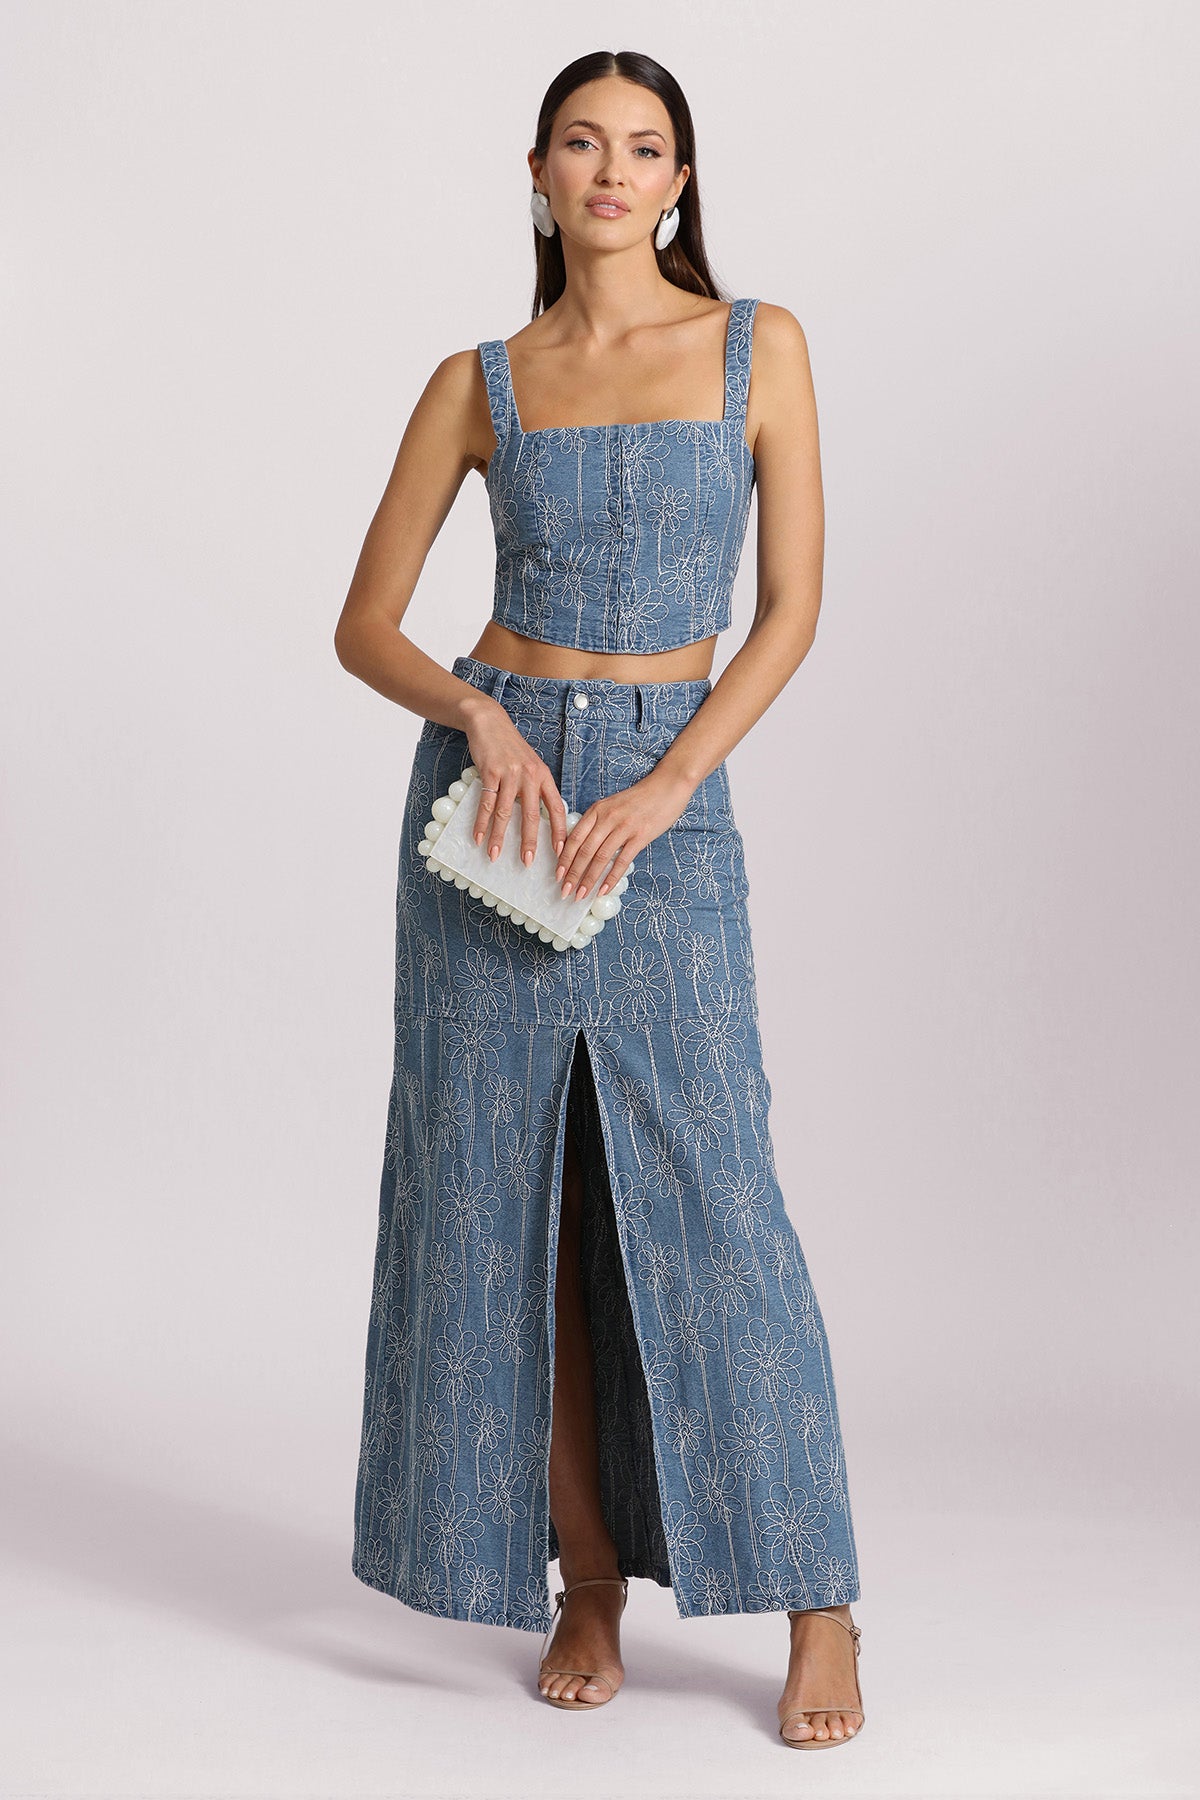 embroidered flower floral blue denim crop top and long skirt with slit set by Avec Les Filles cute day to night designer fashion